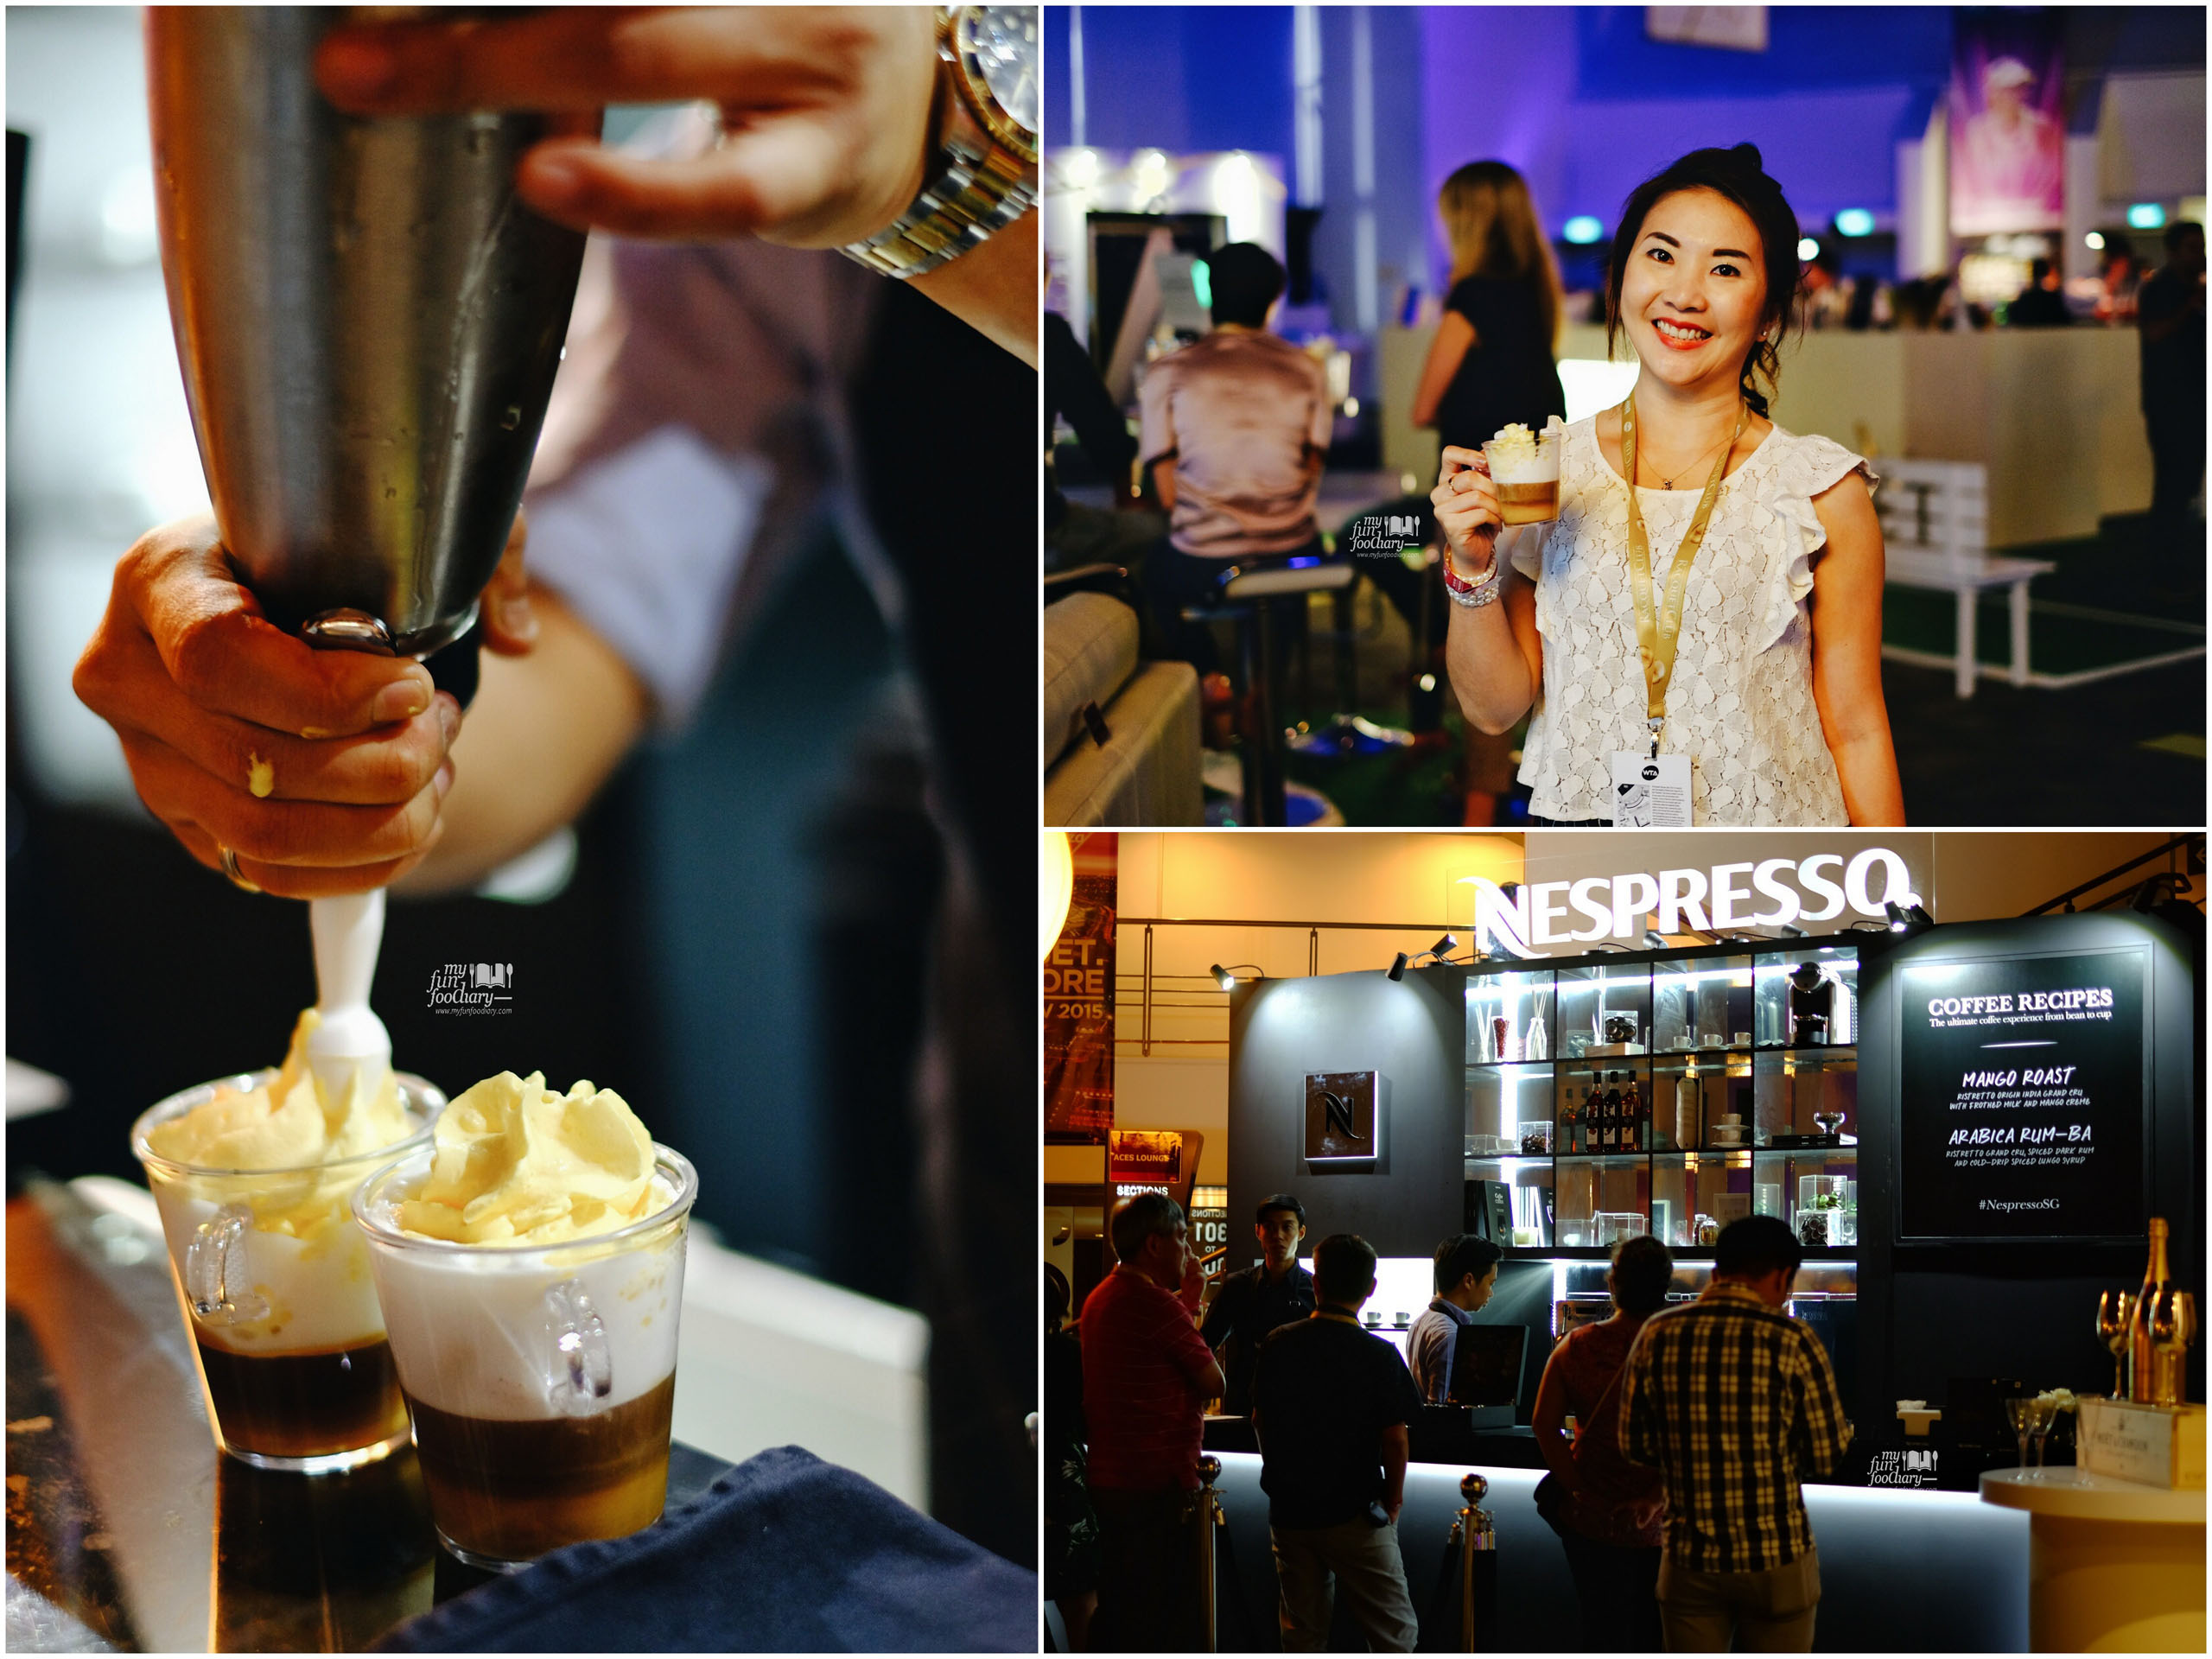 Nespresso at the Indoor Stadium Lounge by Myfunfoodiary